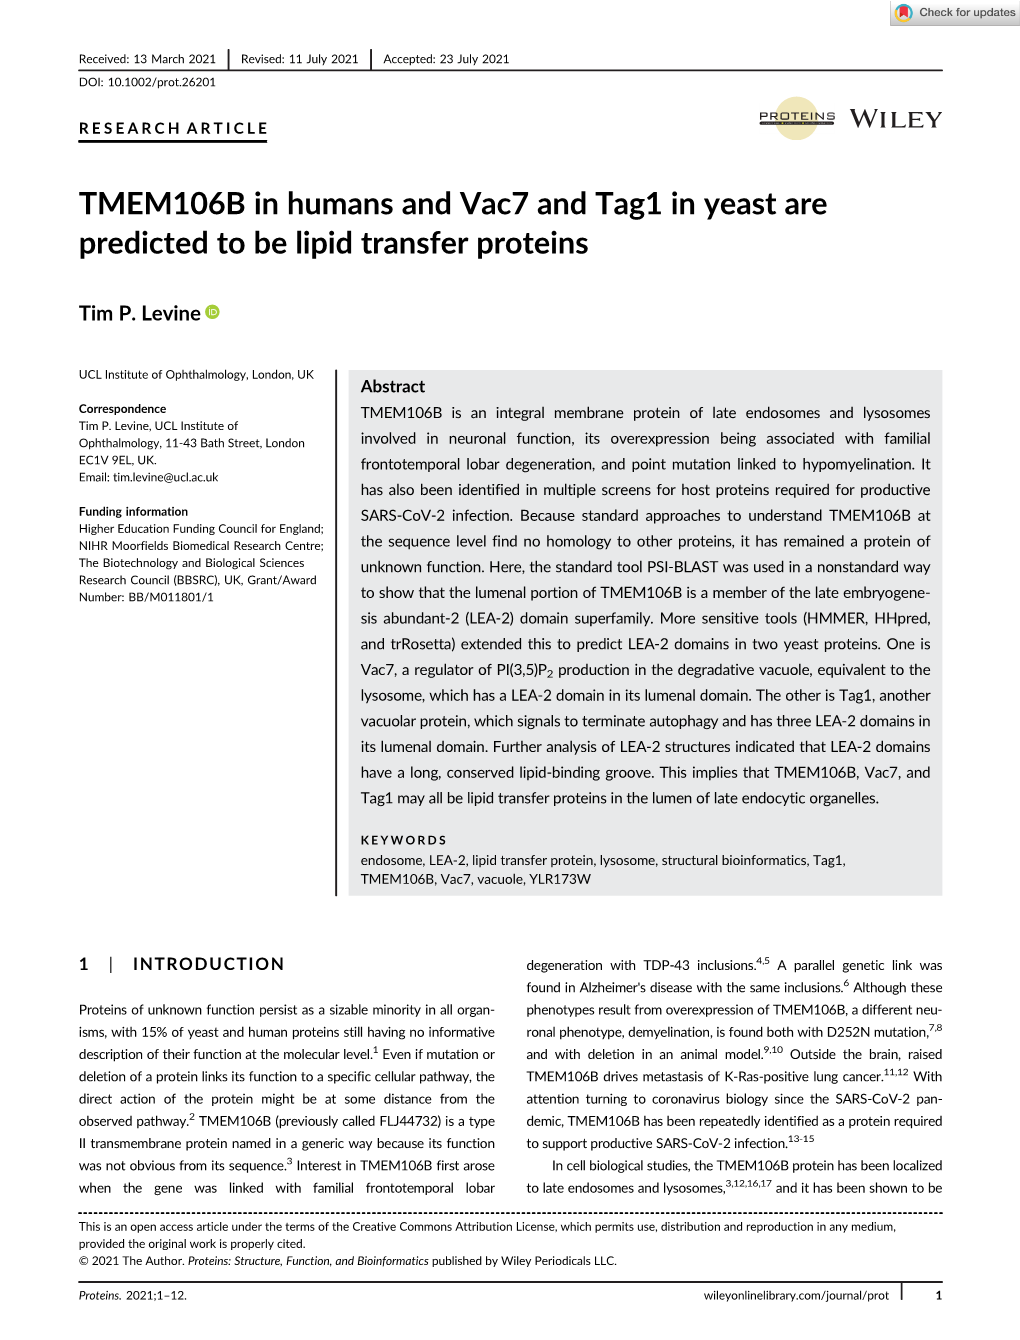 TMEM106B in Humans and Vac7 and Tag1 in Yeast Are Predicted to Be Lipid Transfer Proteins